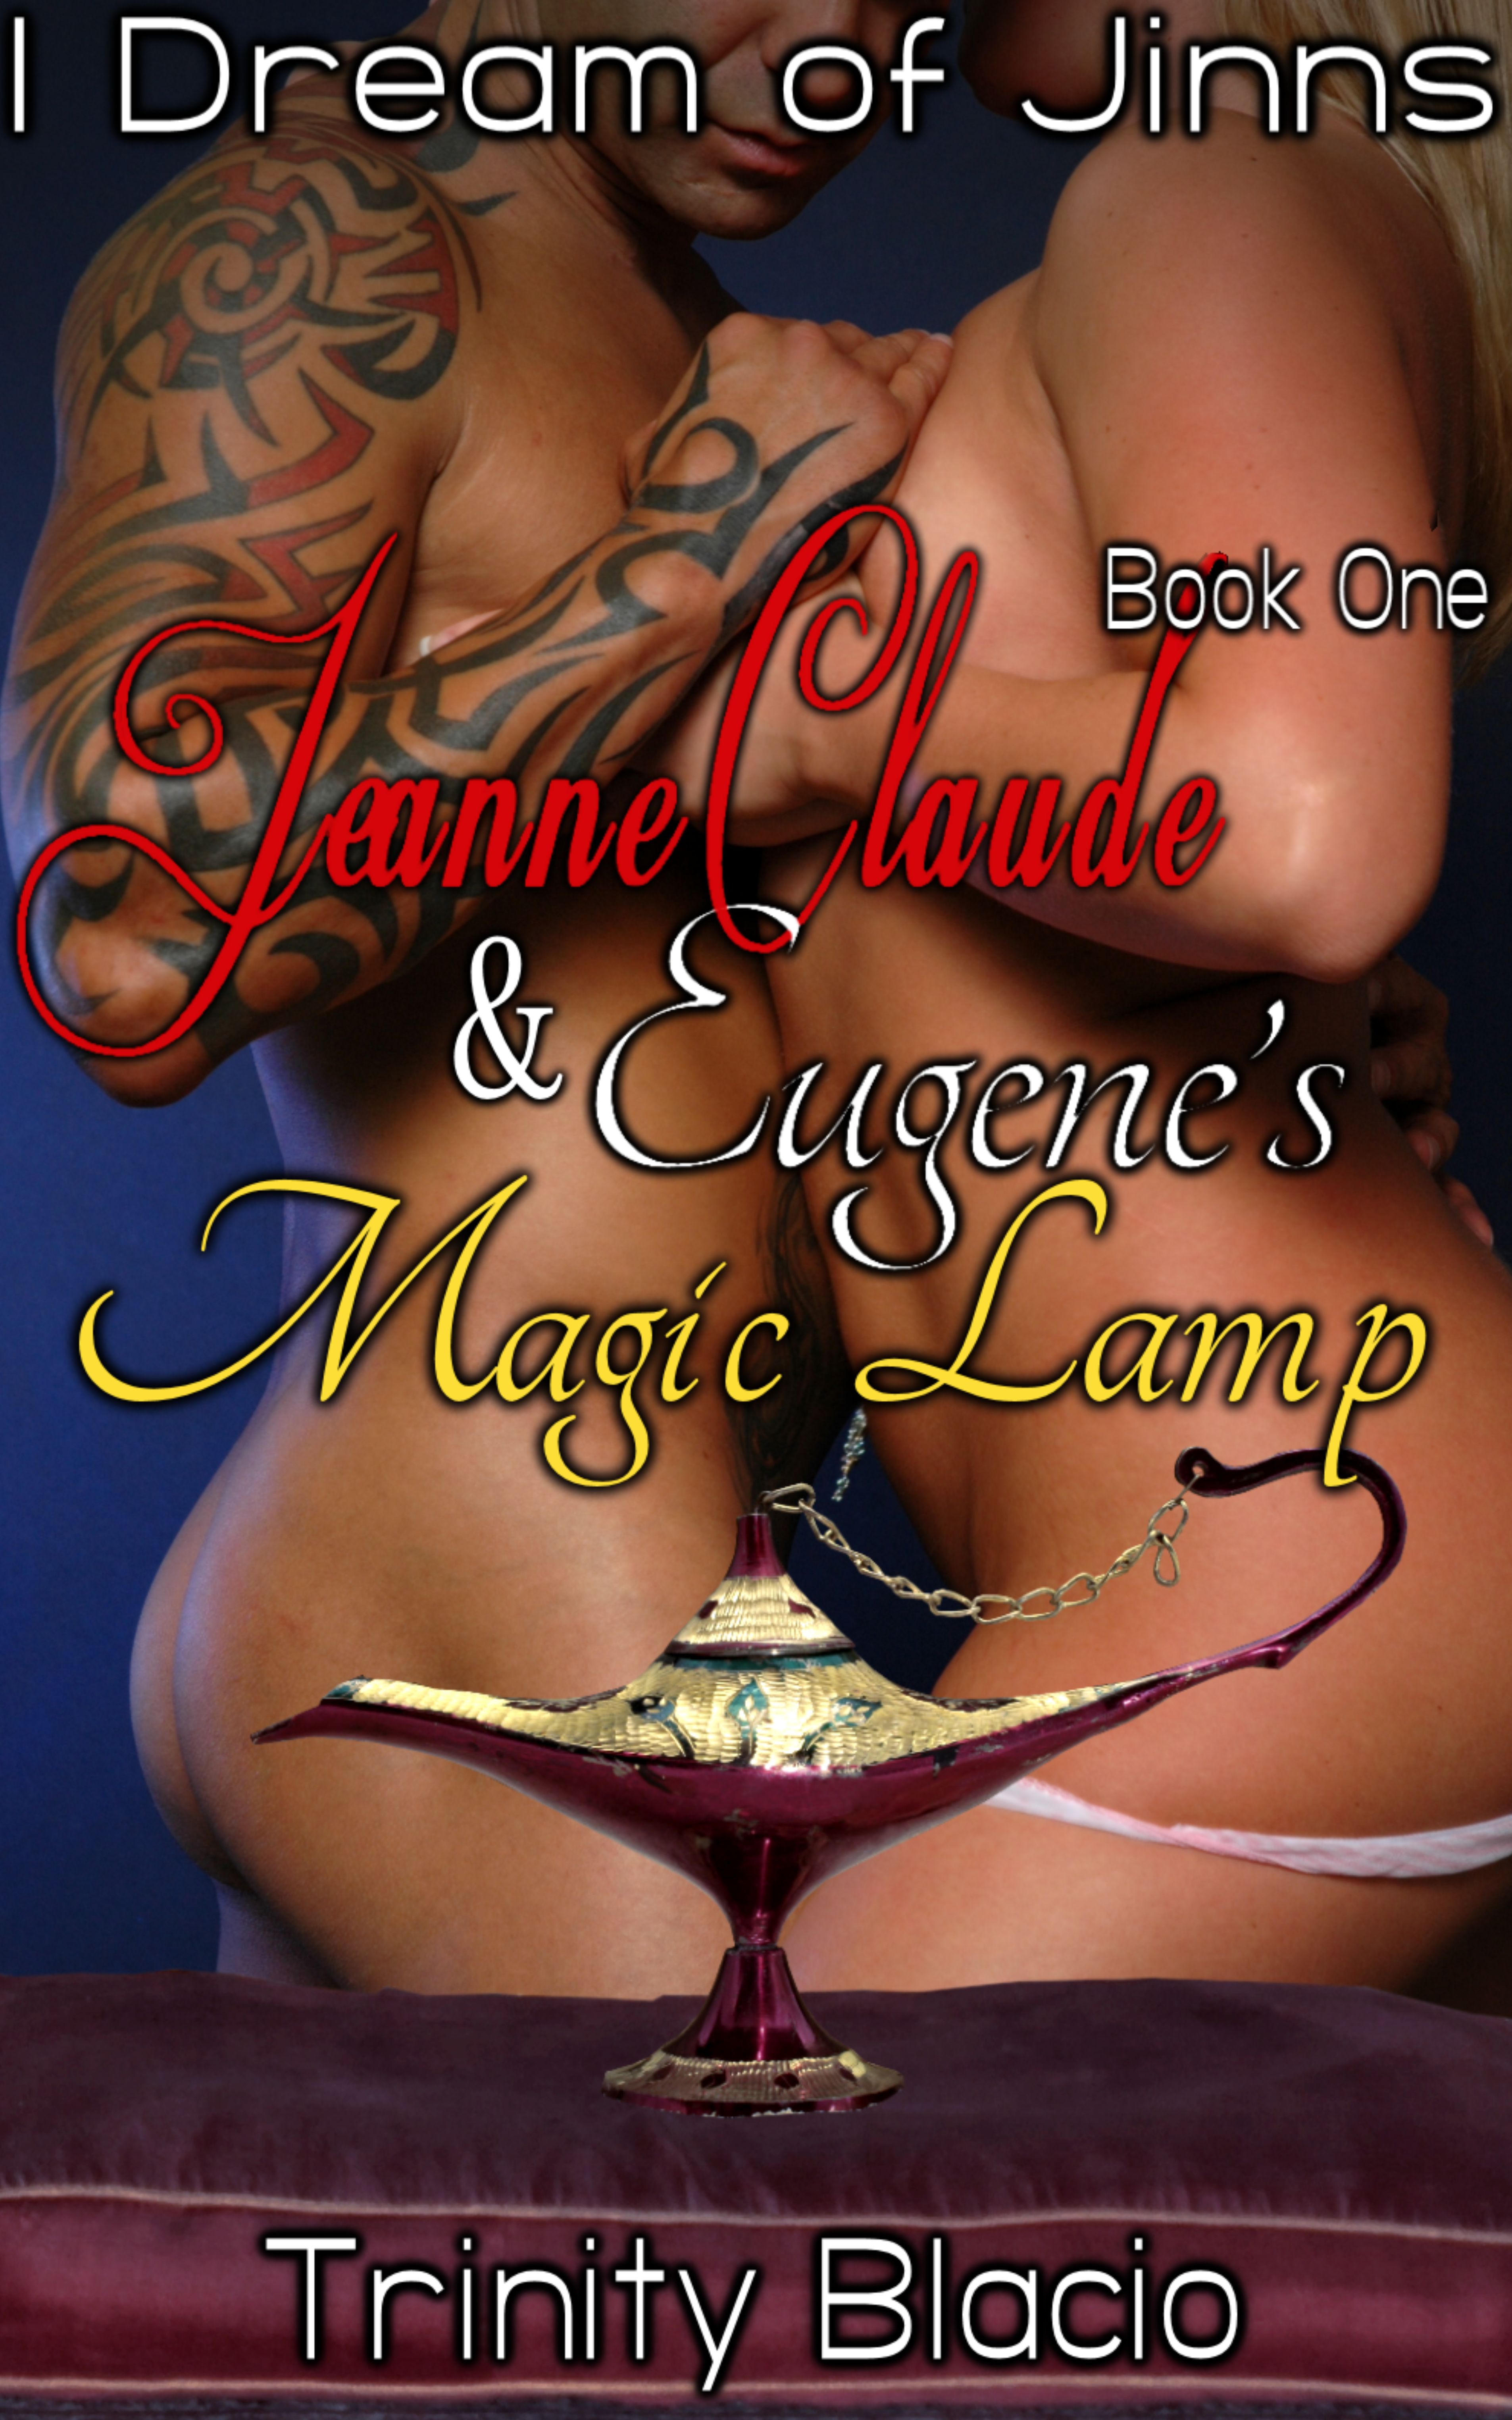 Jeanne-Claude and Eugene’s Magic Lamp